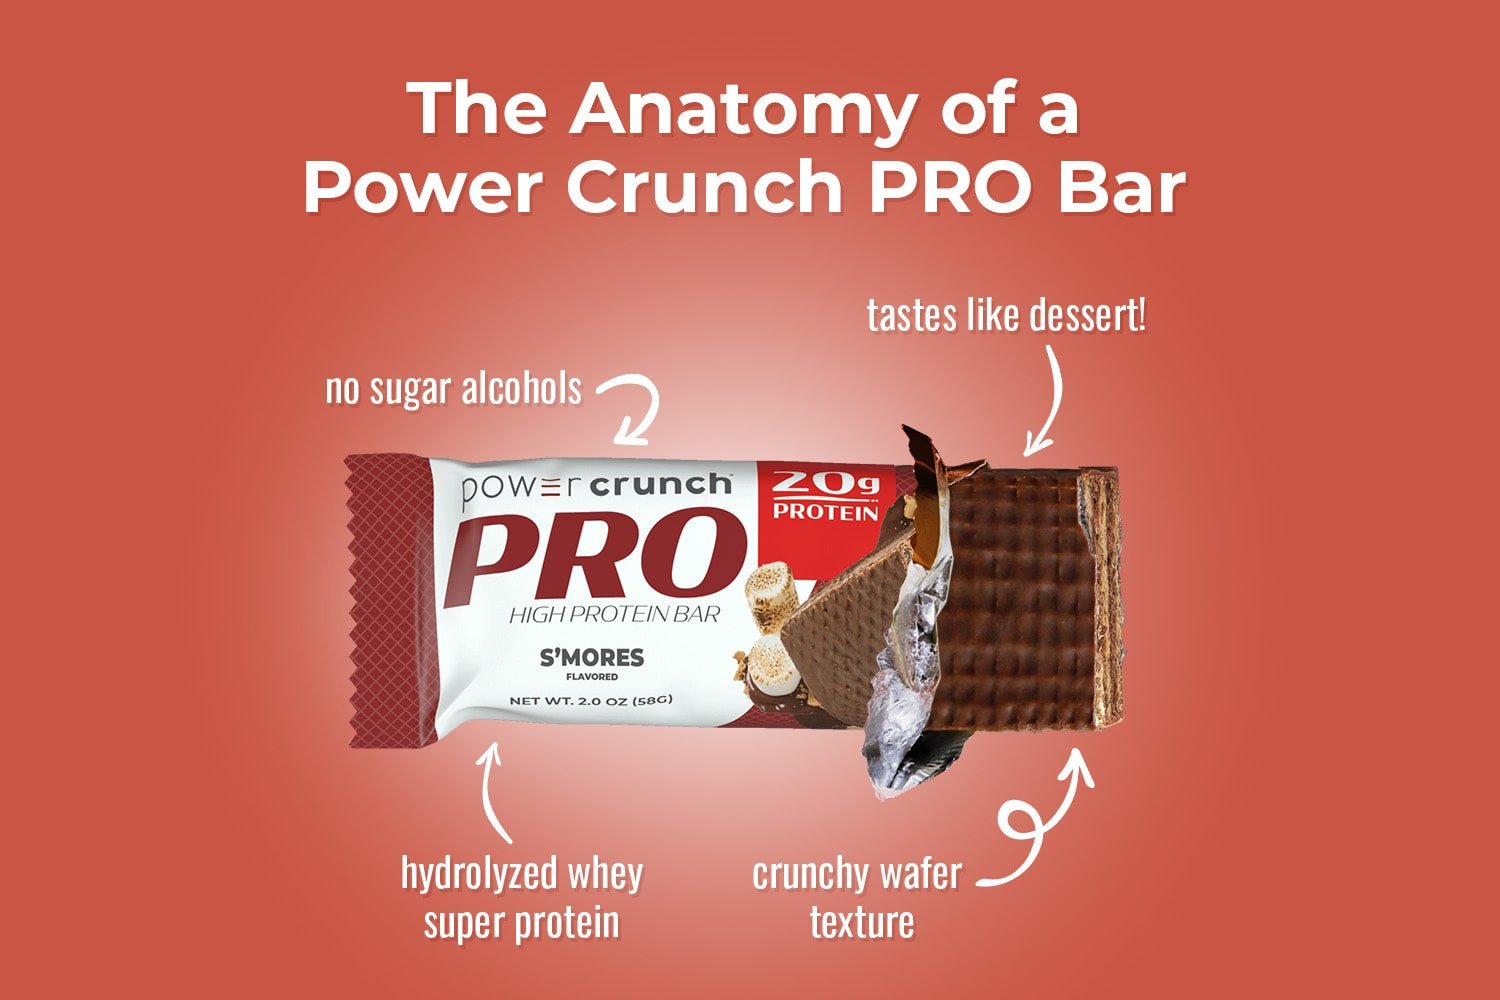 Anatomy of a Power Crunch PRO S'mores bar with hydrolyzed whey protein, crunchy wafers